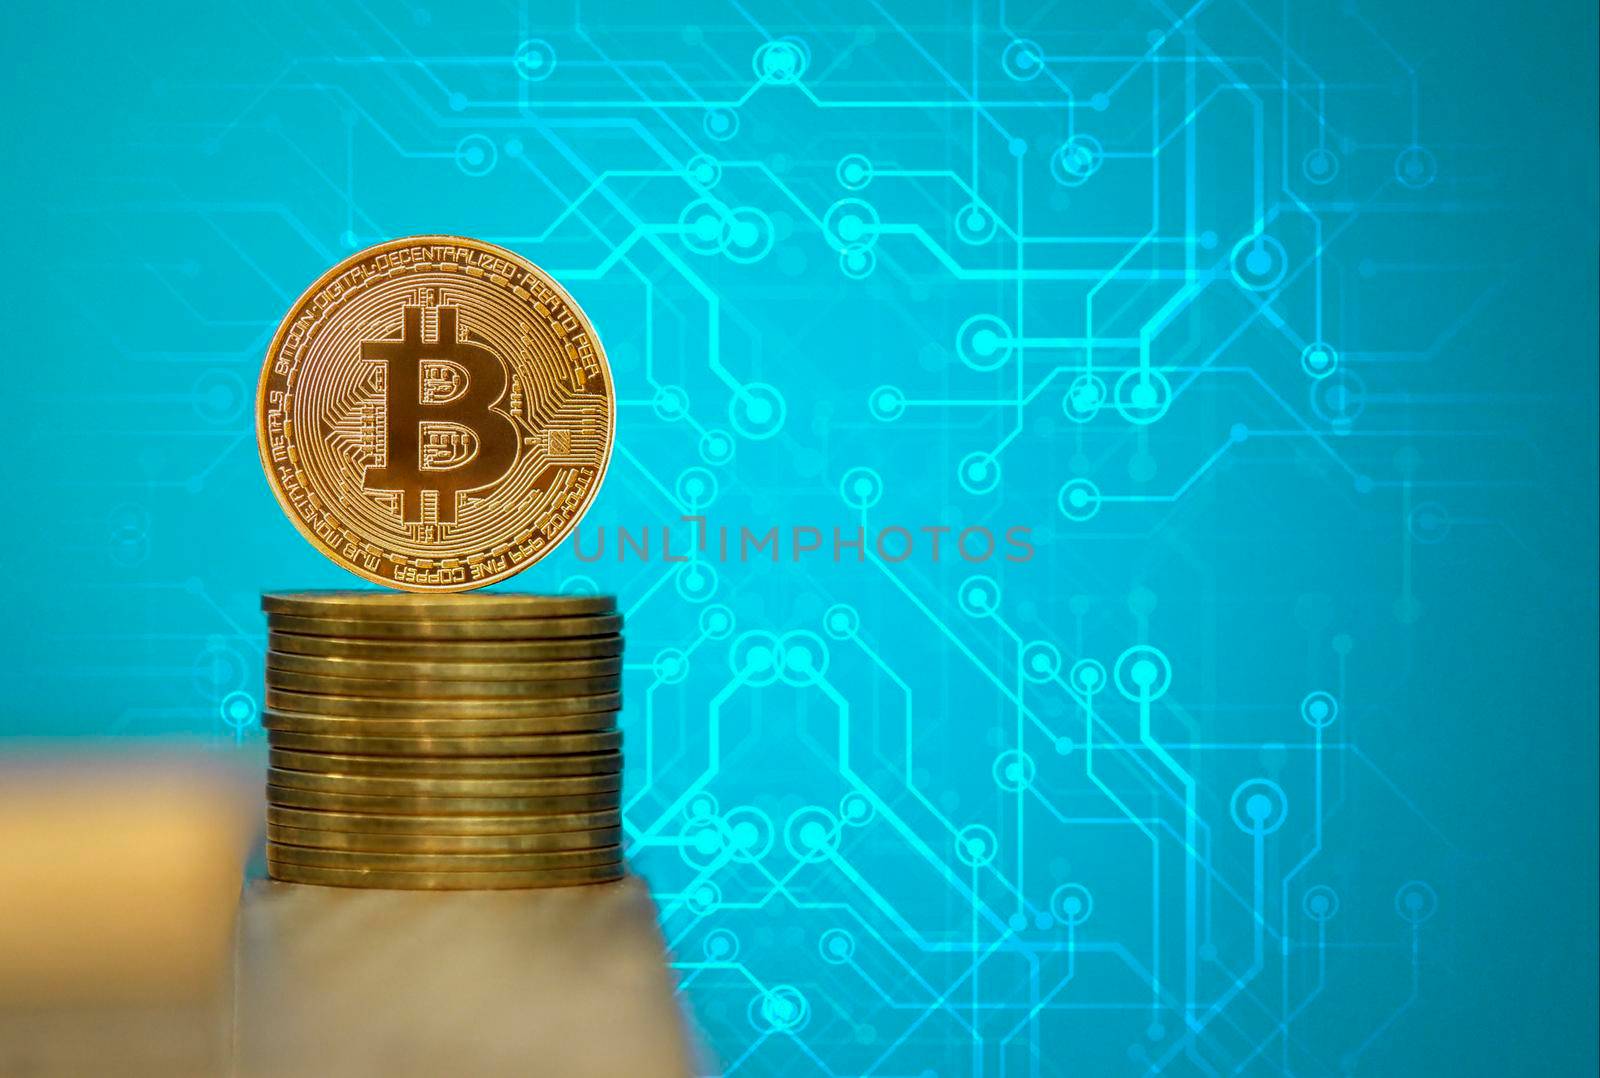 Bitcoin coins with blue background, one gold bitcoin on blue background by isaiphoto